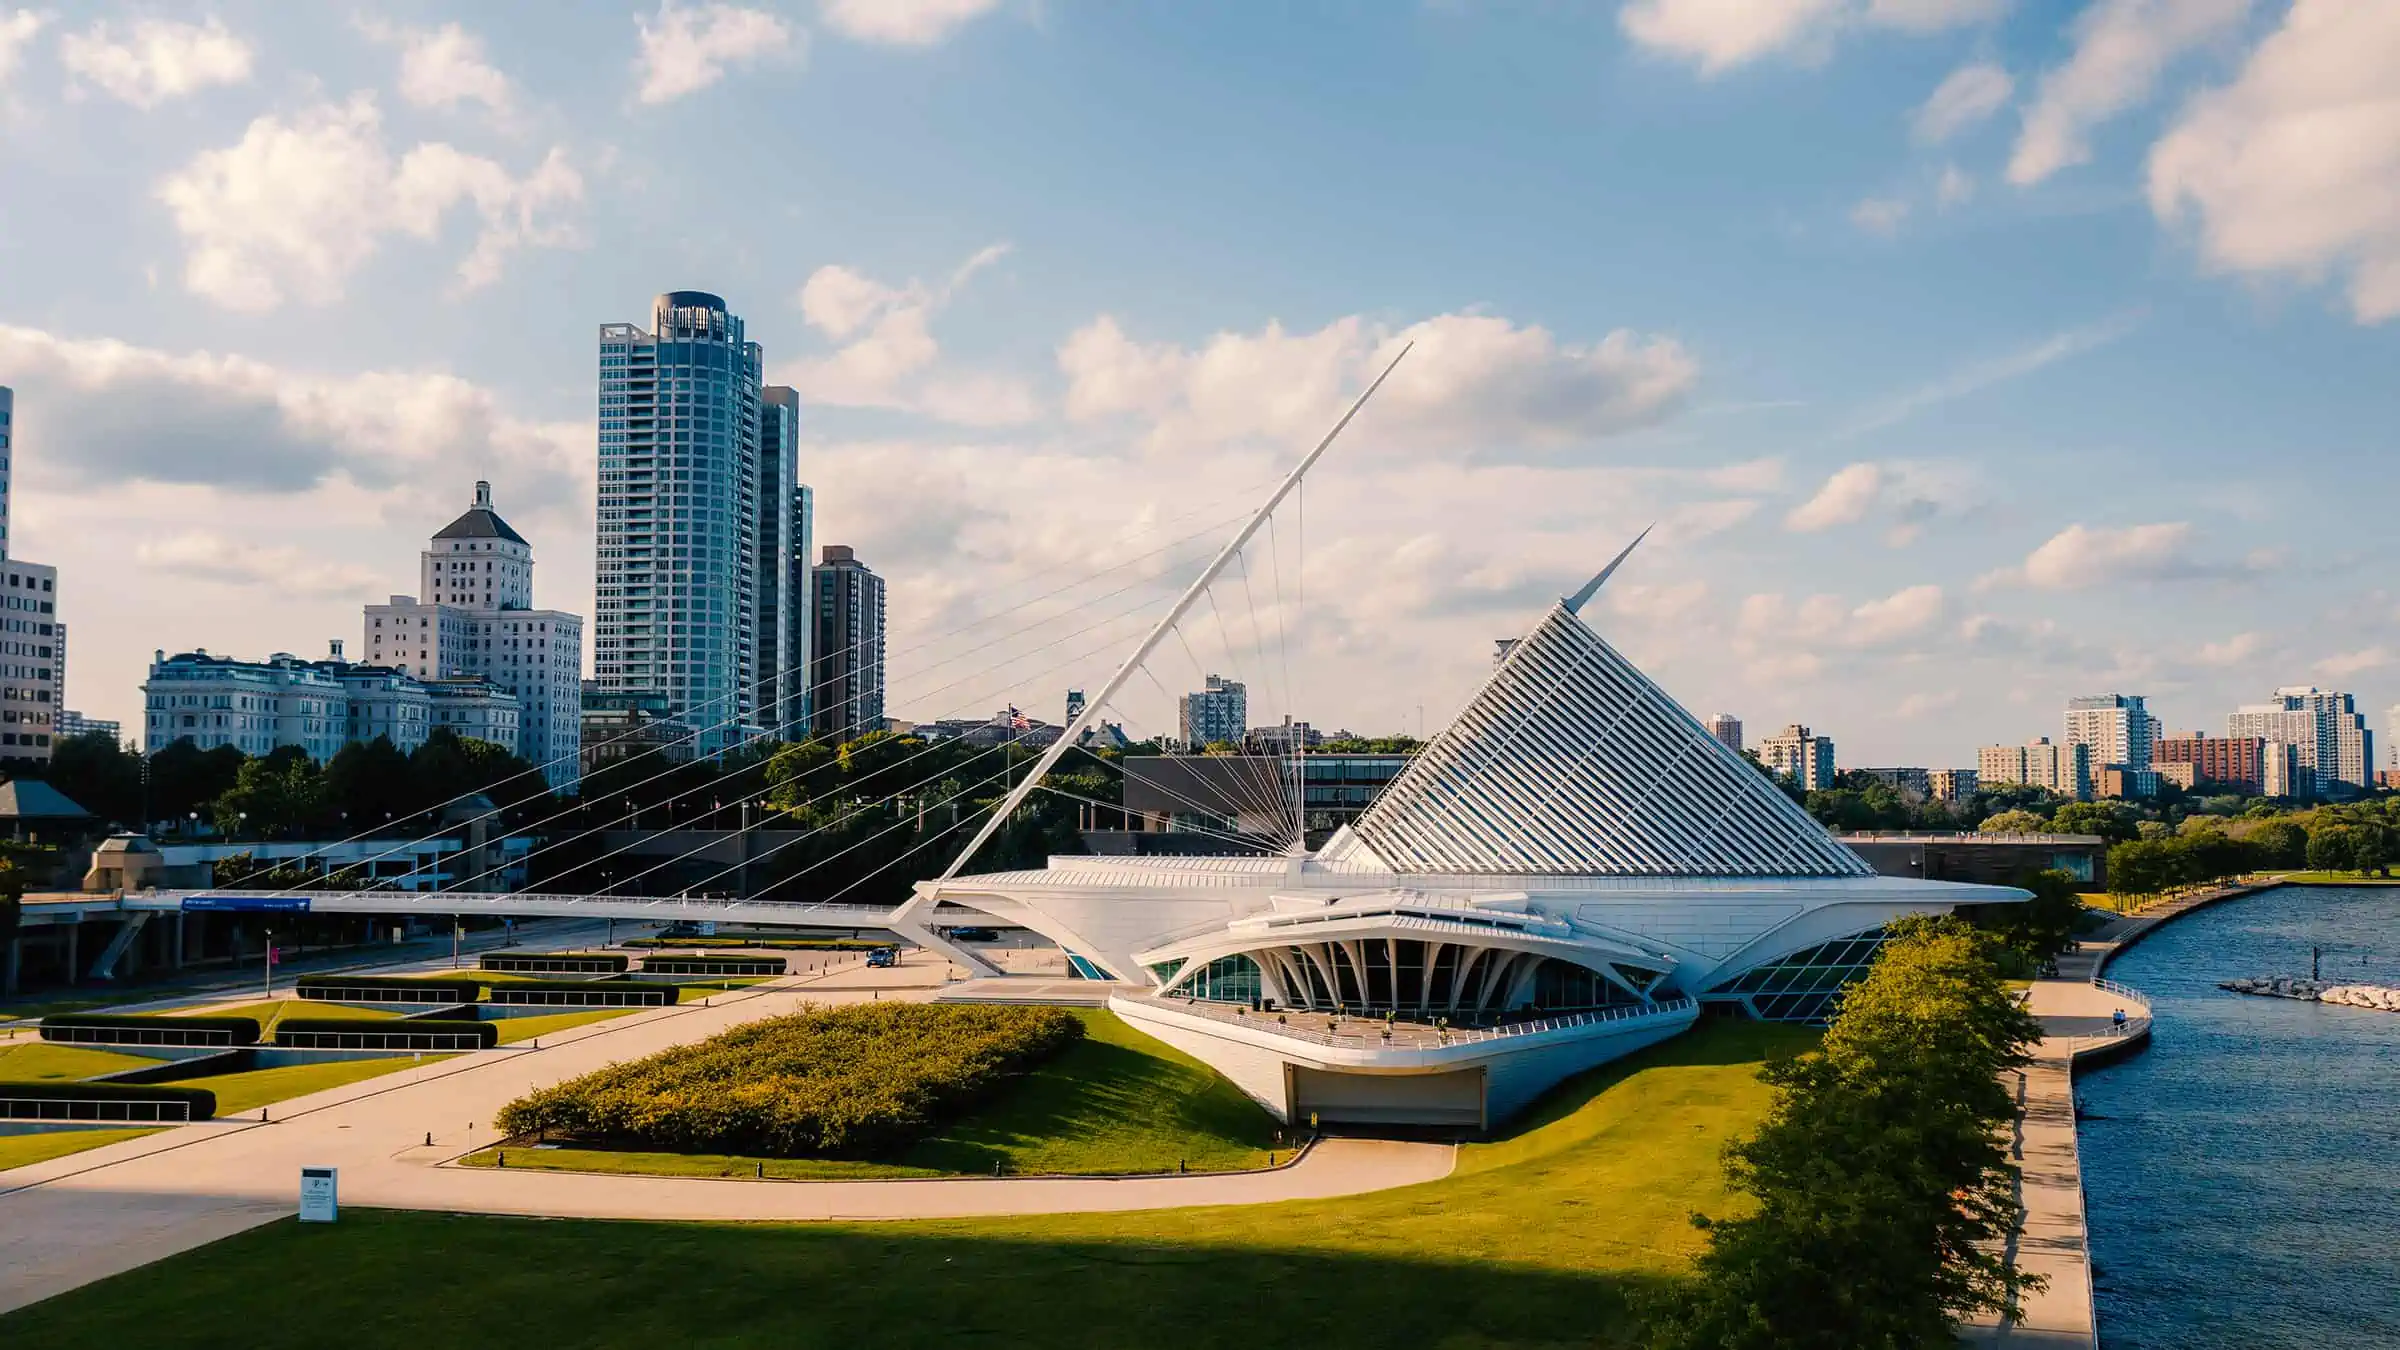 Milwaukee Art Museum, Lakefront and Partial View of Skyline